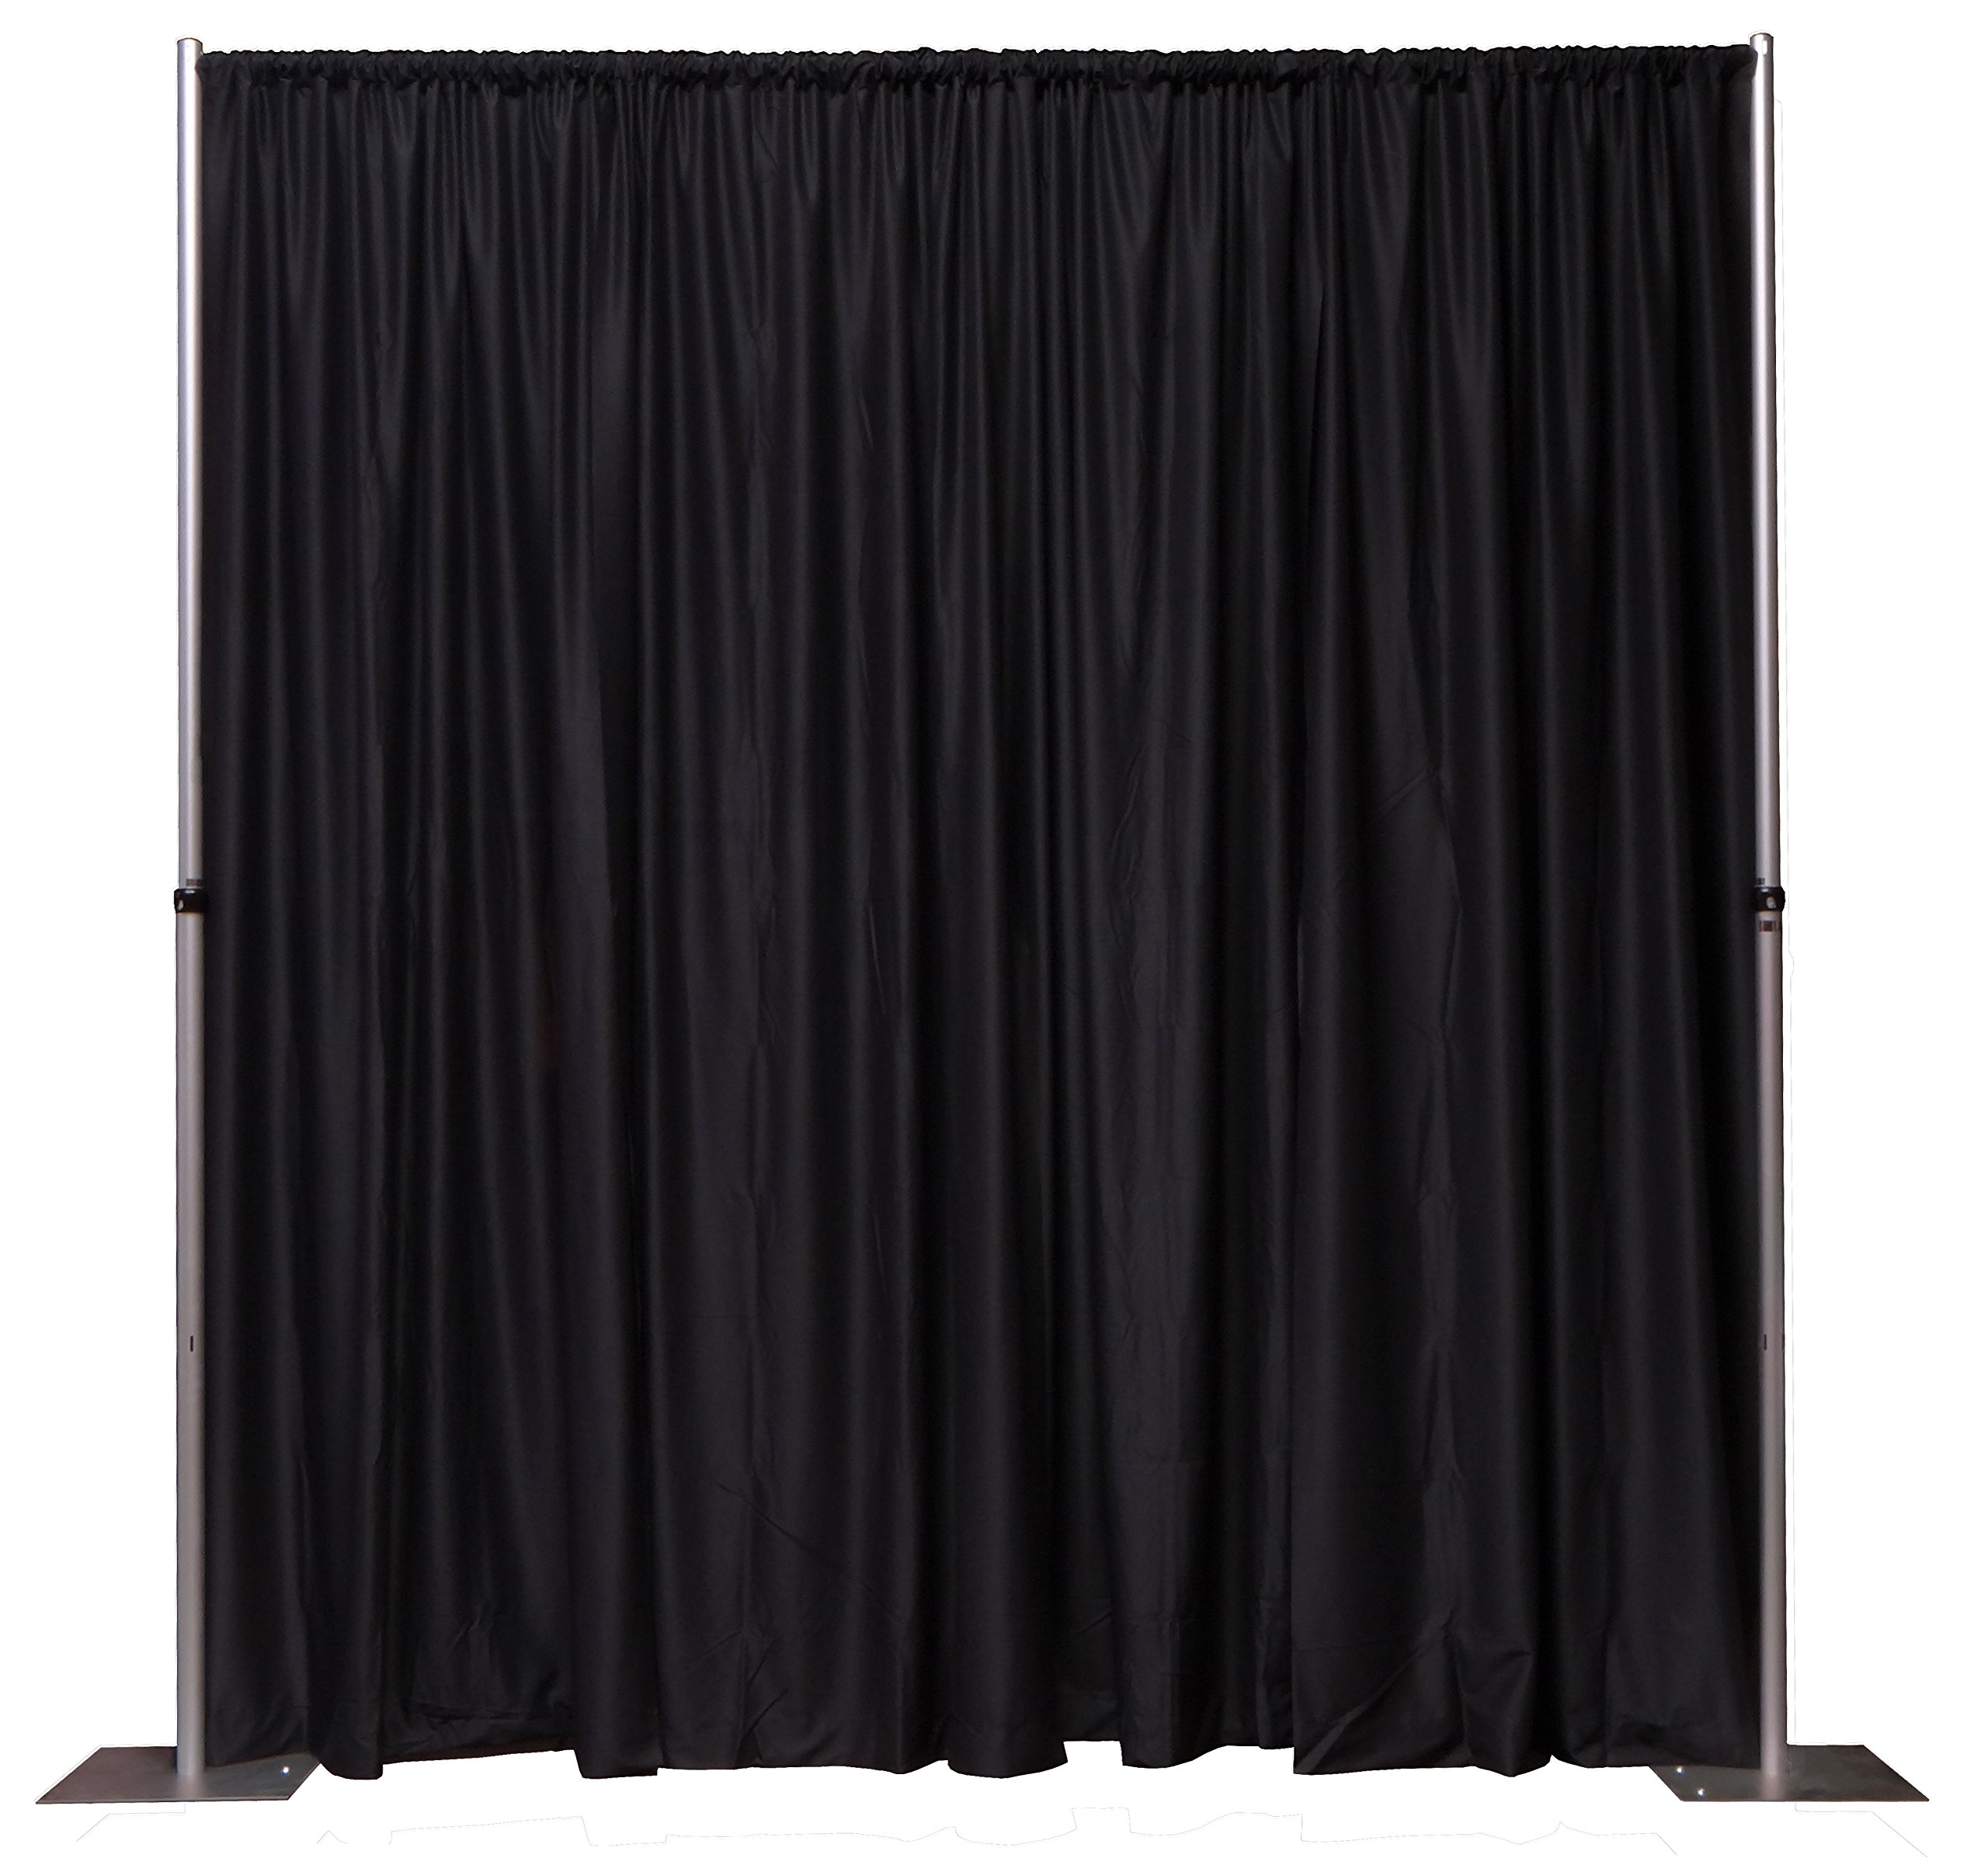 OnlineEEI, Adjustable Height Pipe and Drape Backdrop or Room Divider Kit, 7ft to 12ft High x 7ft to 12ft Wide, Black Premier Drape Included